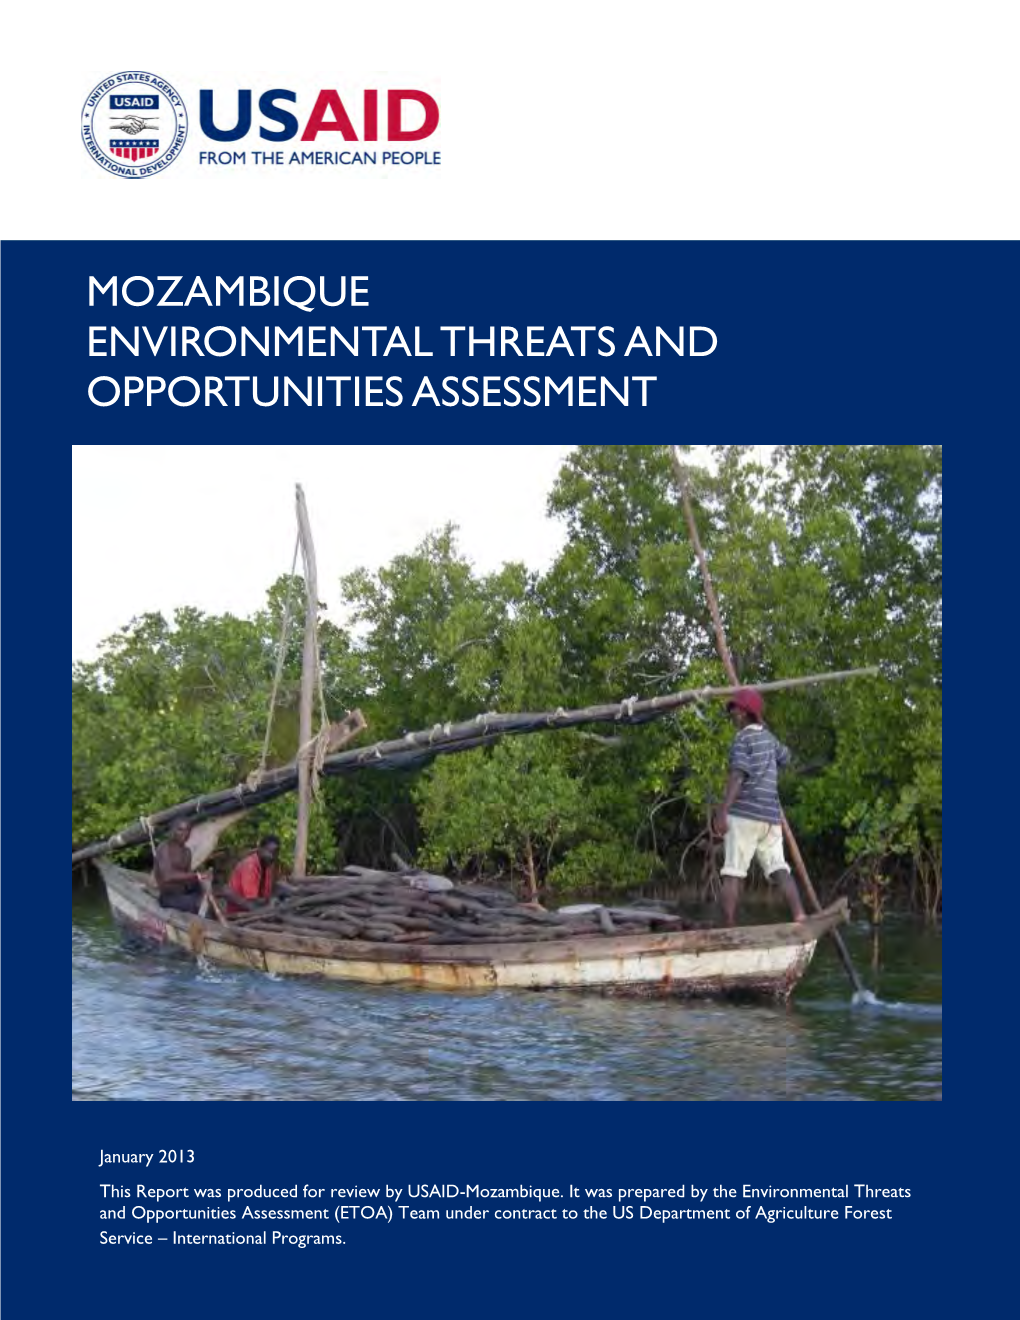 Mozambique Environmental Threats and Opportunities Assessment